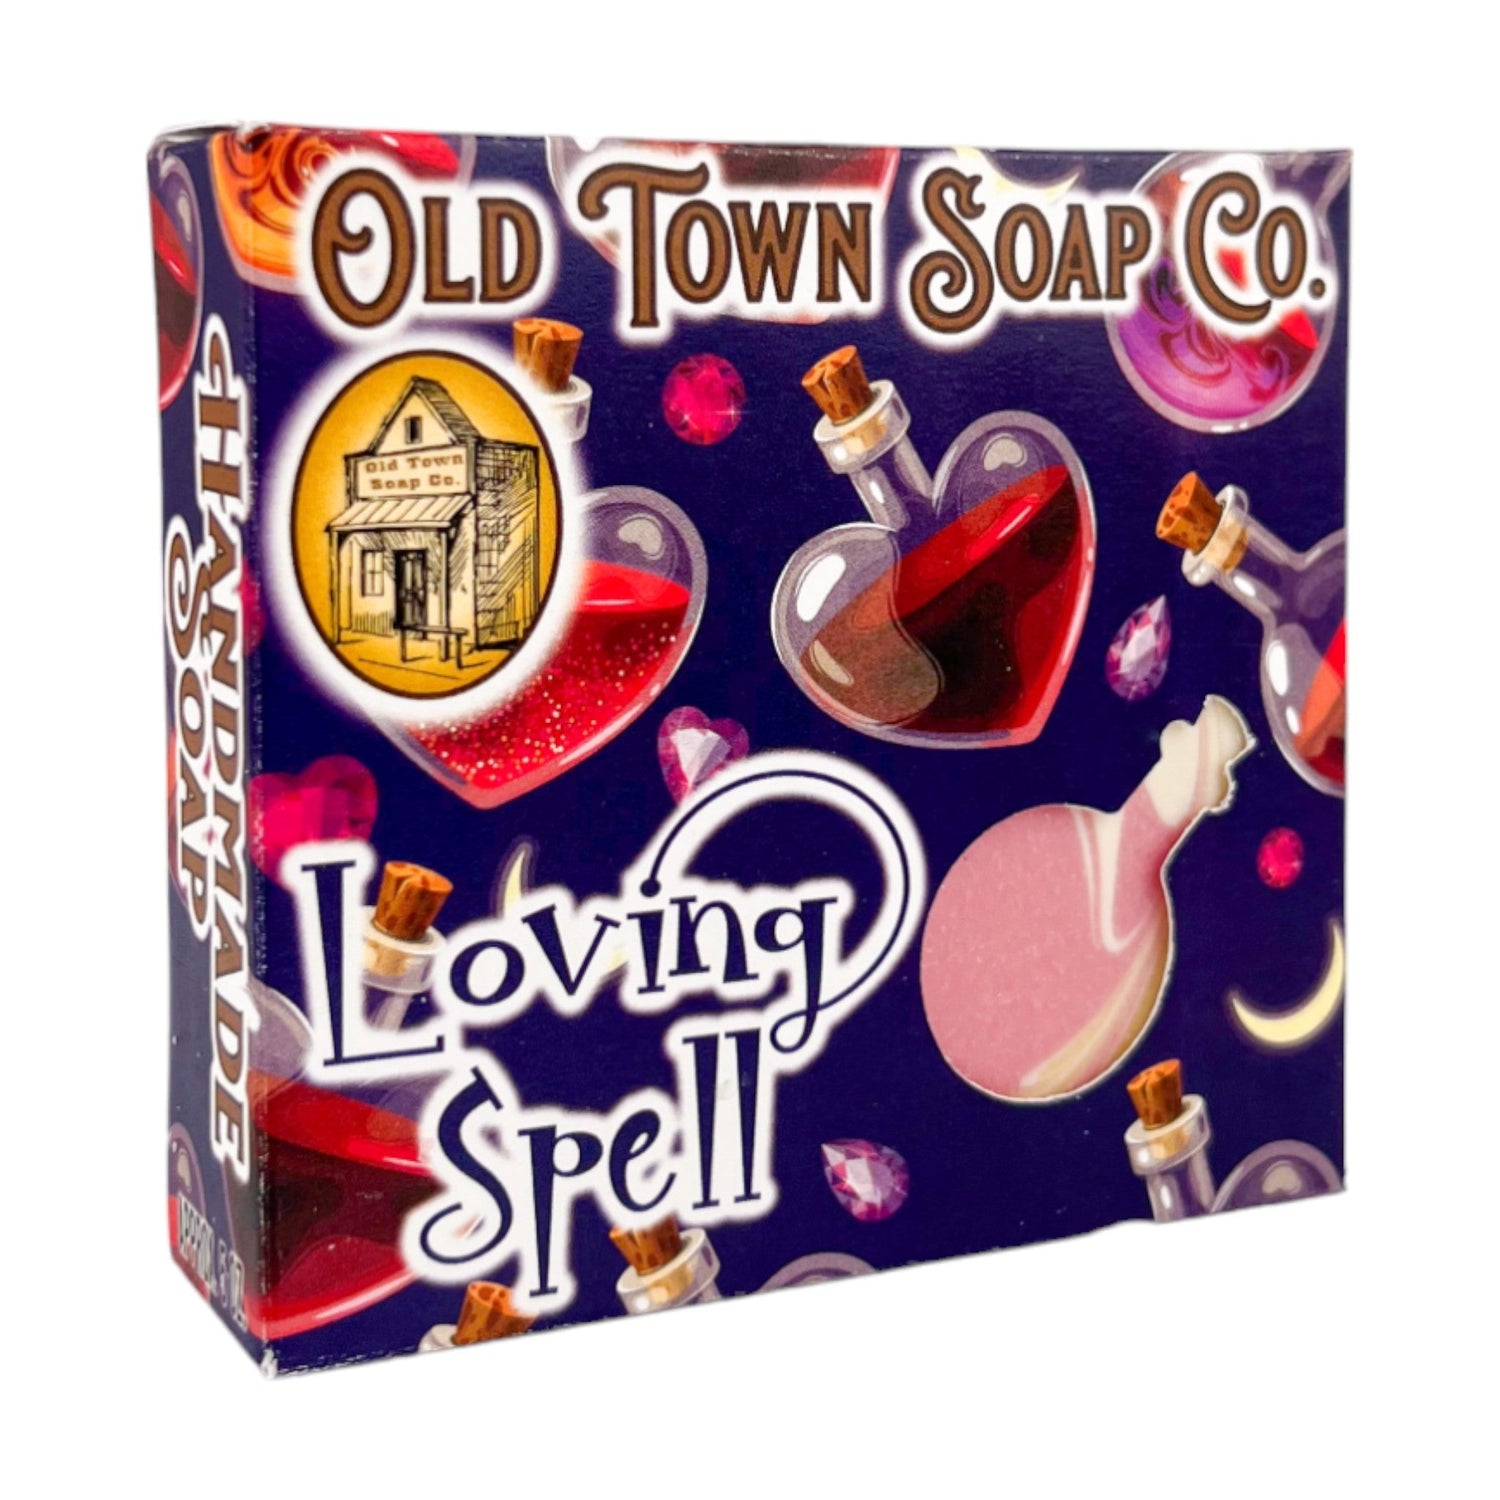 Loving Spell -Bar Soap - Old Town Soap Co.